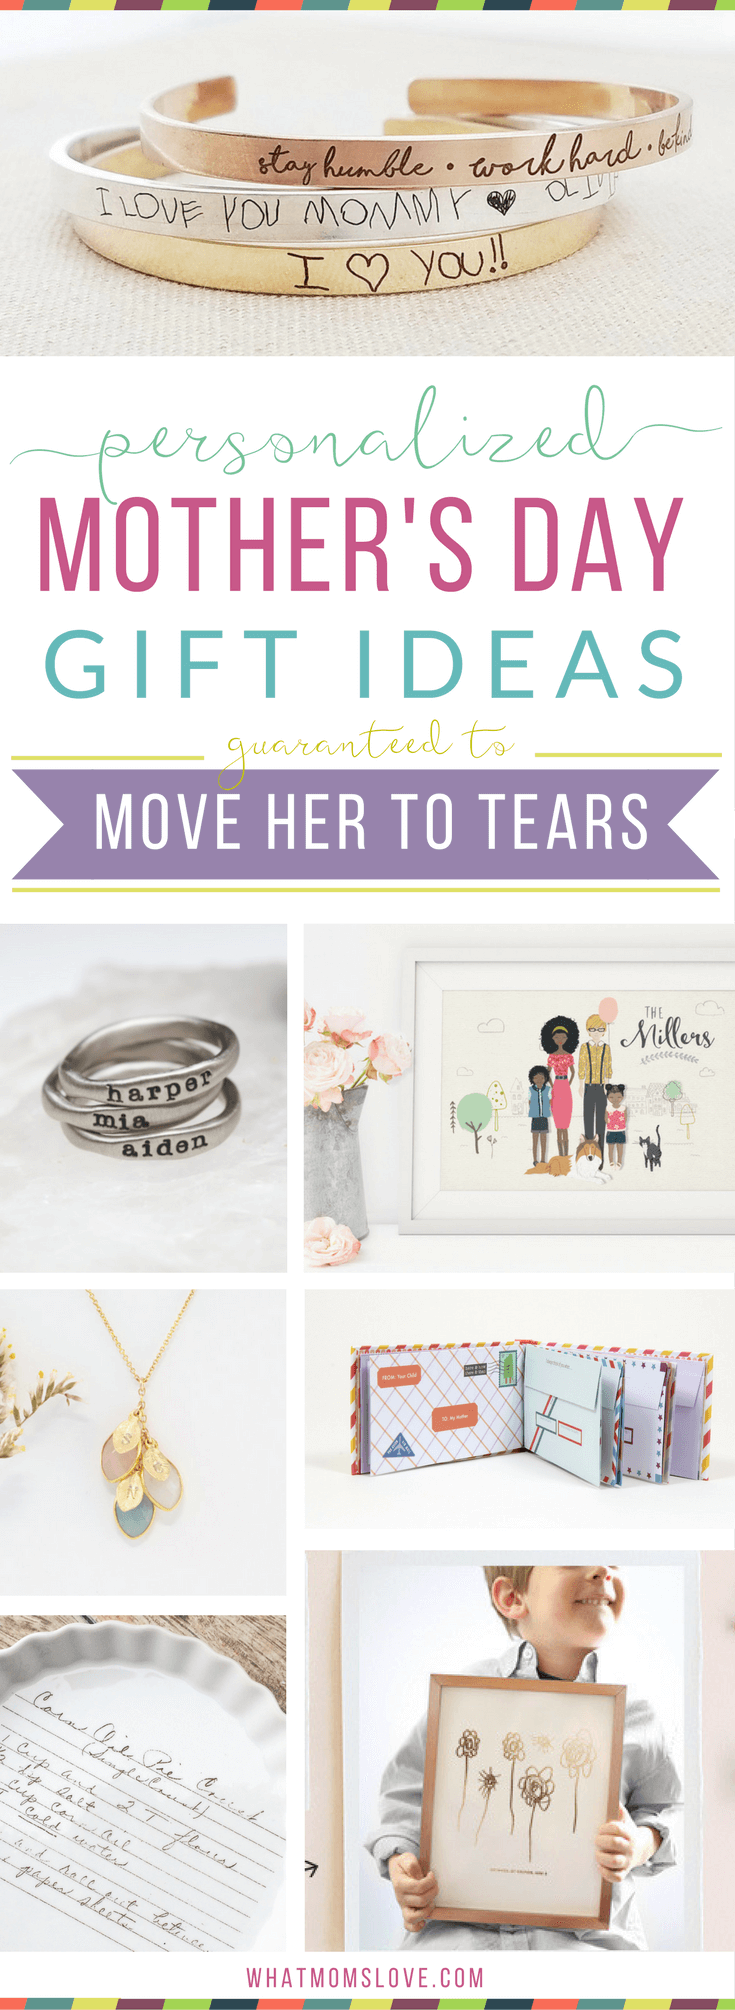 Unique personalized gift ideas for Mother's Day | Meaningful custom gifts for mom, nana or grandma from you, your kids (toddlers to teens) or grandkids. Buy her something she'll fall in love with this year - ideas for custom jewelry, portraits, kitchen, home and decor presents.